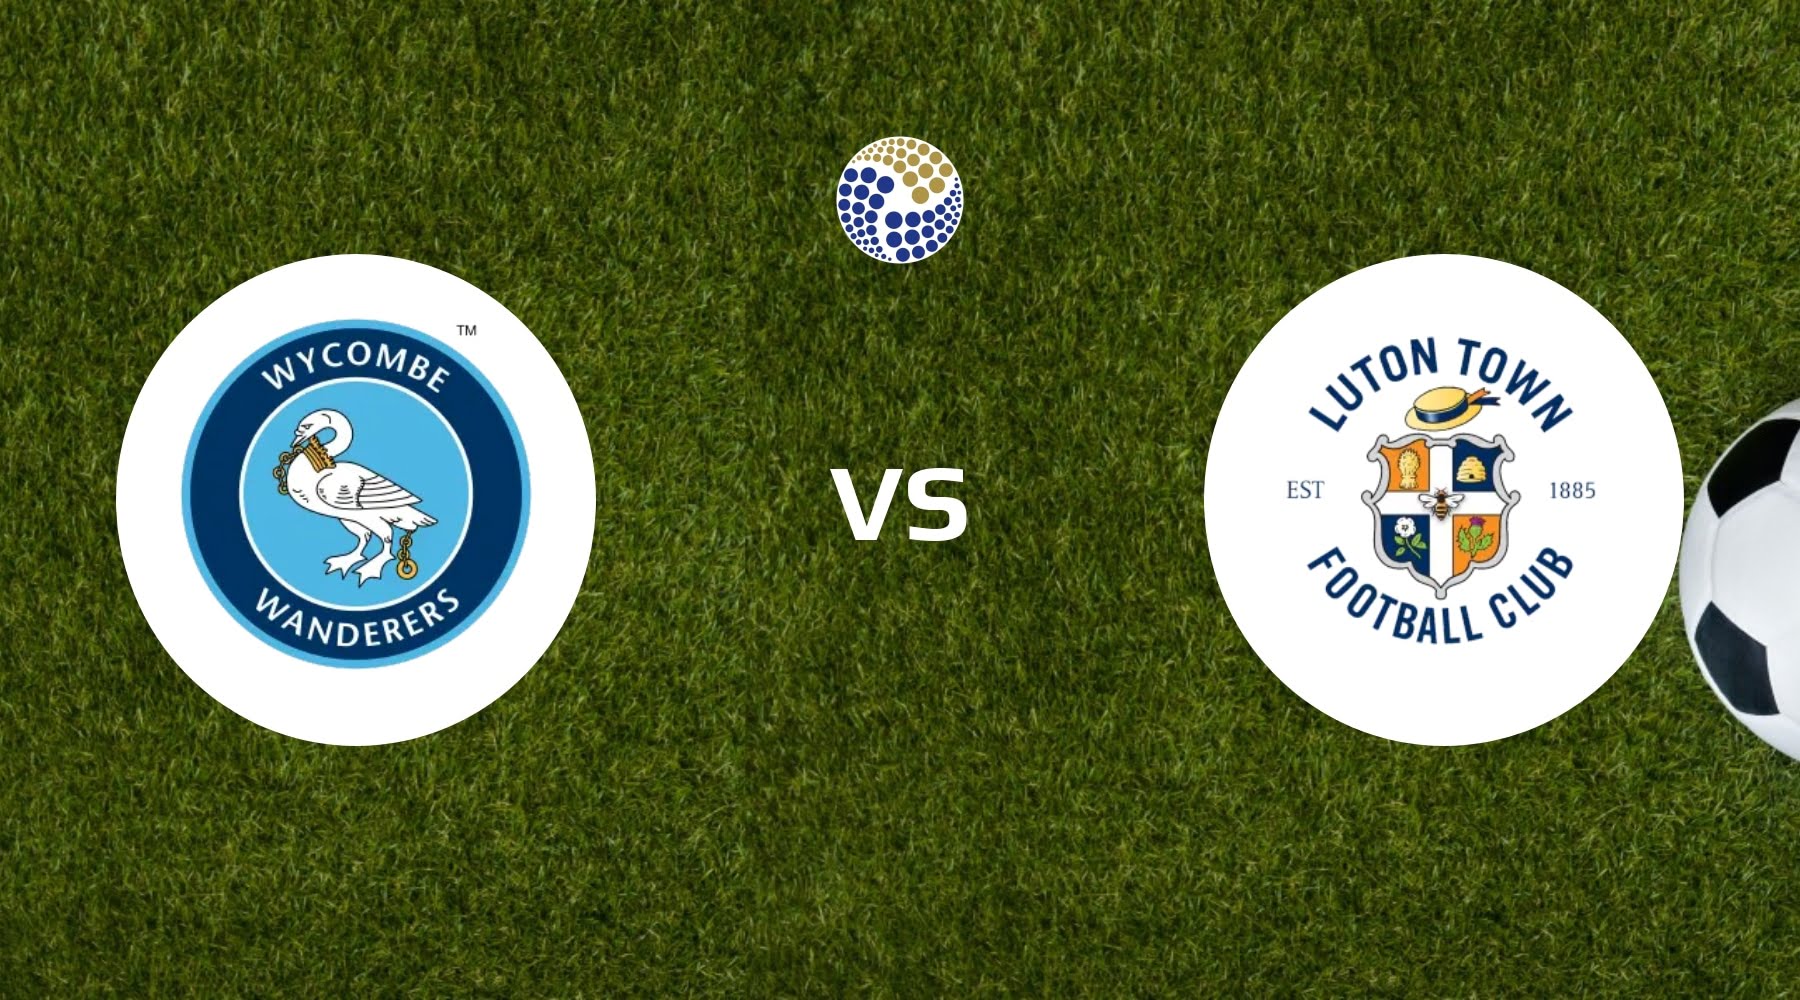 Wycombe Wanderers vs Luton Town Betting Tips & Prediction